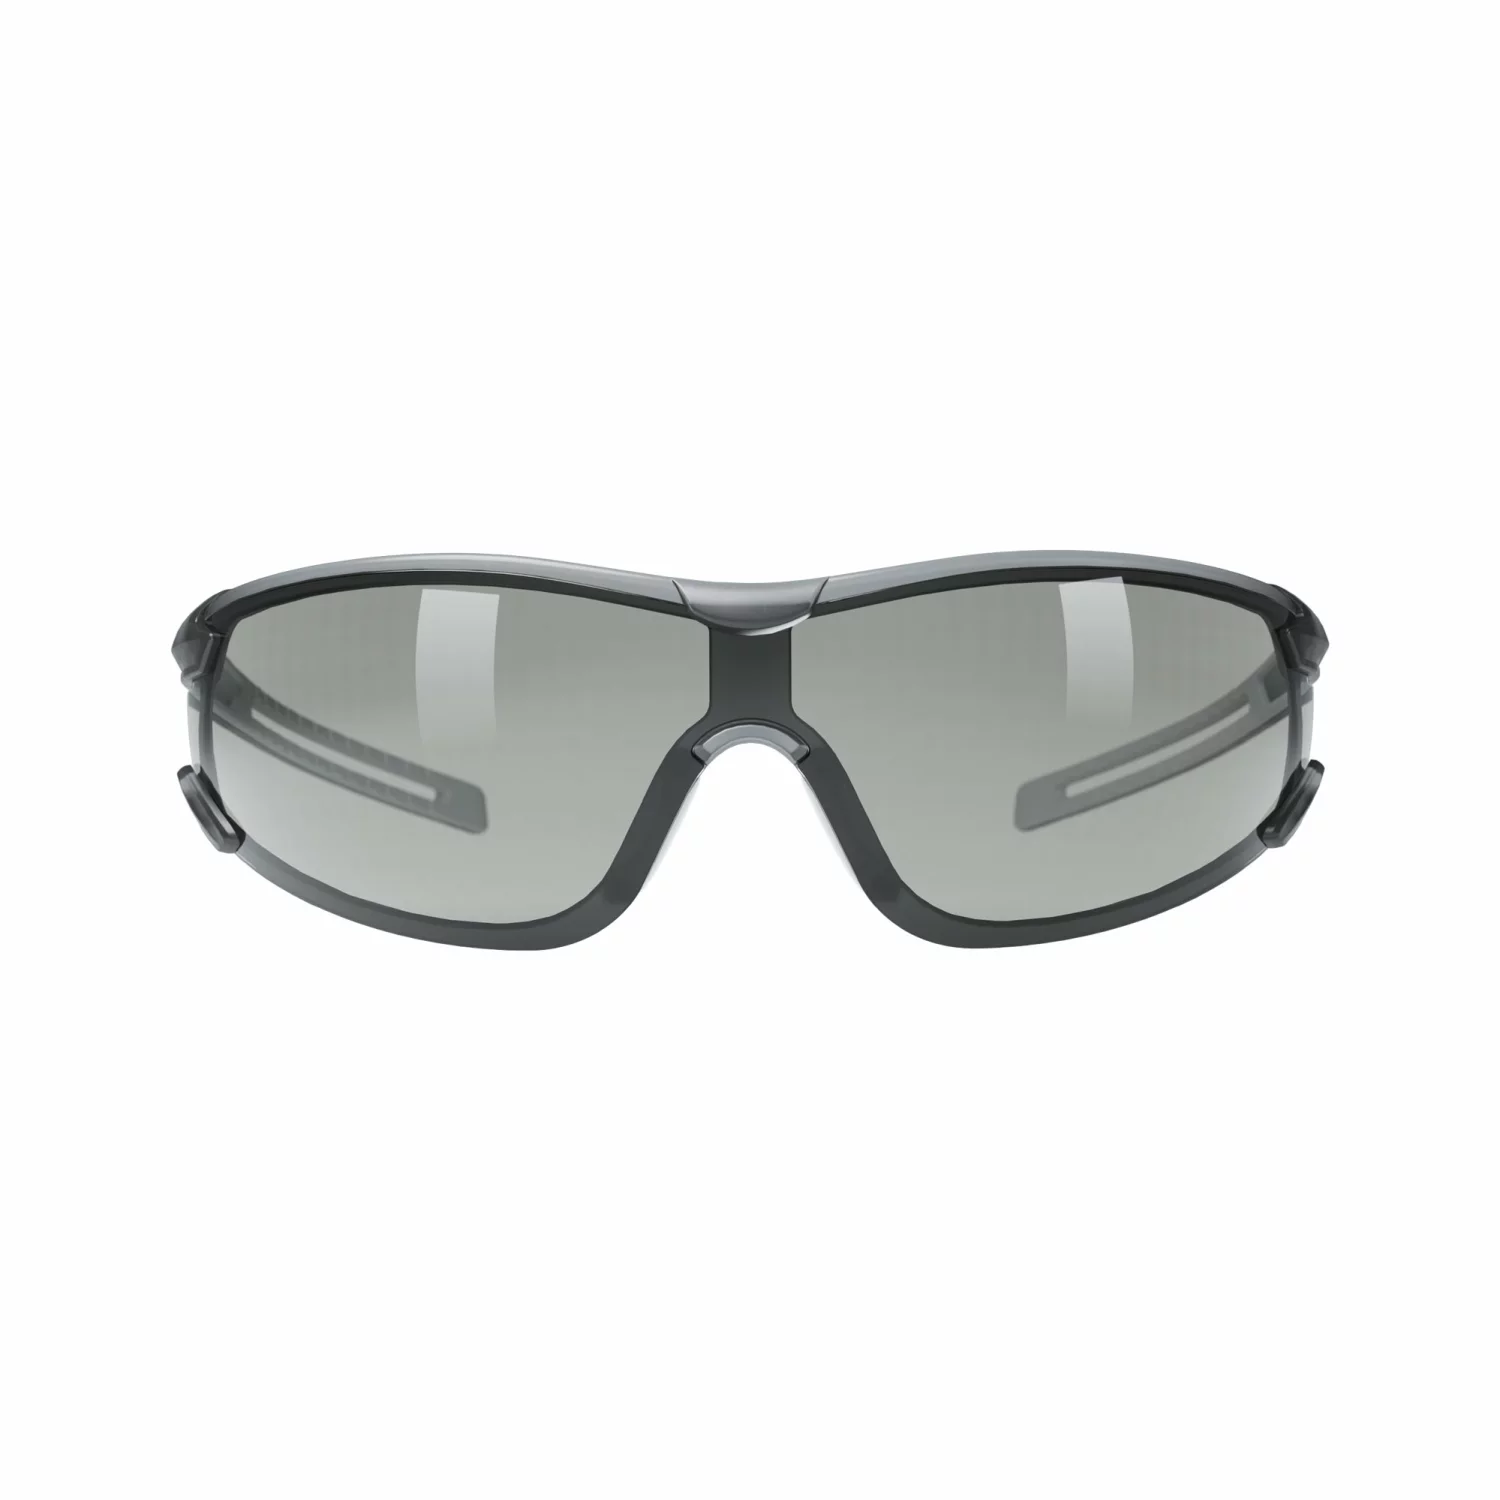 Hellberg Safety 21431-001 Lunettes de protection